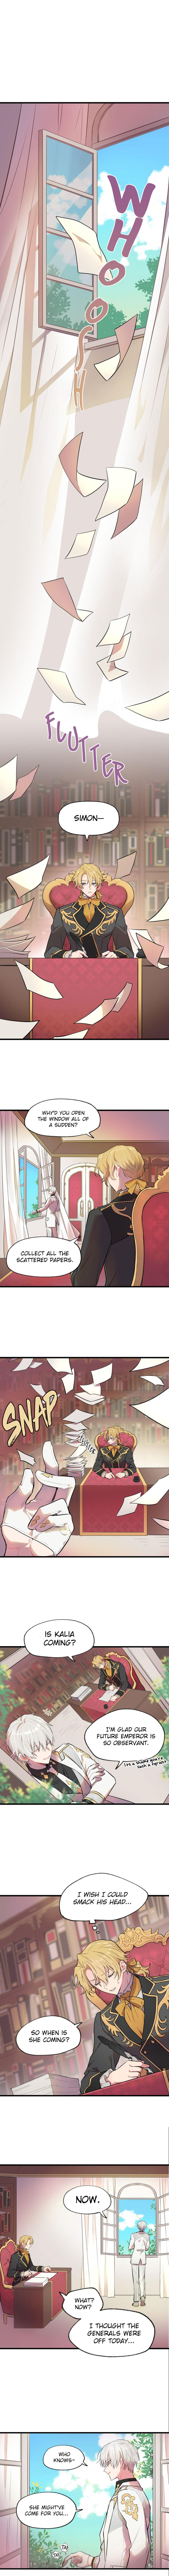 The Baby Isn't Yours Chapter 1 page 11 - Mangakakalot